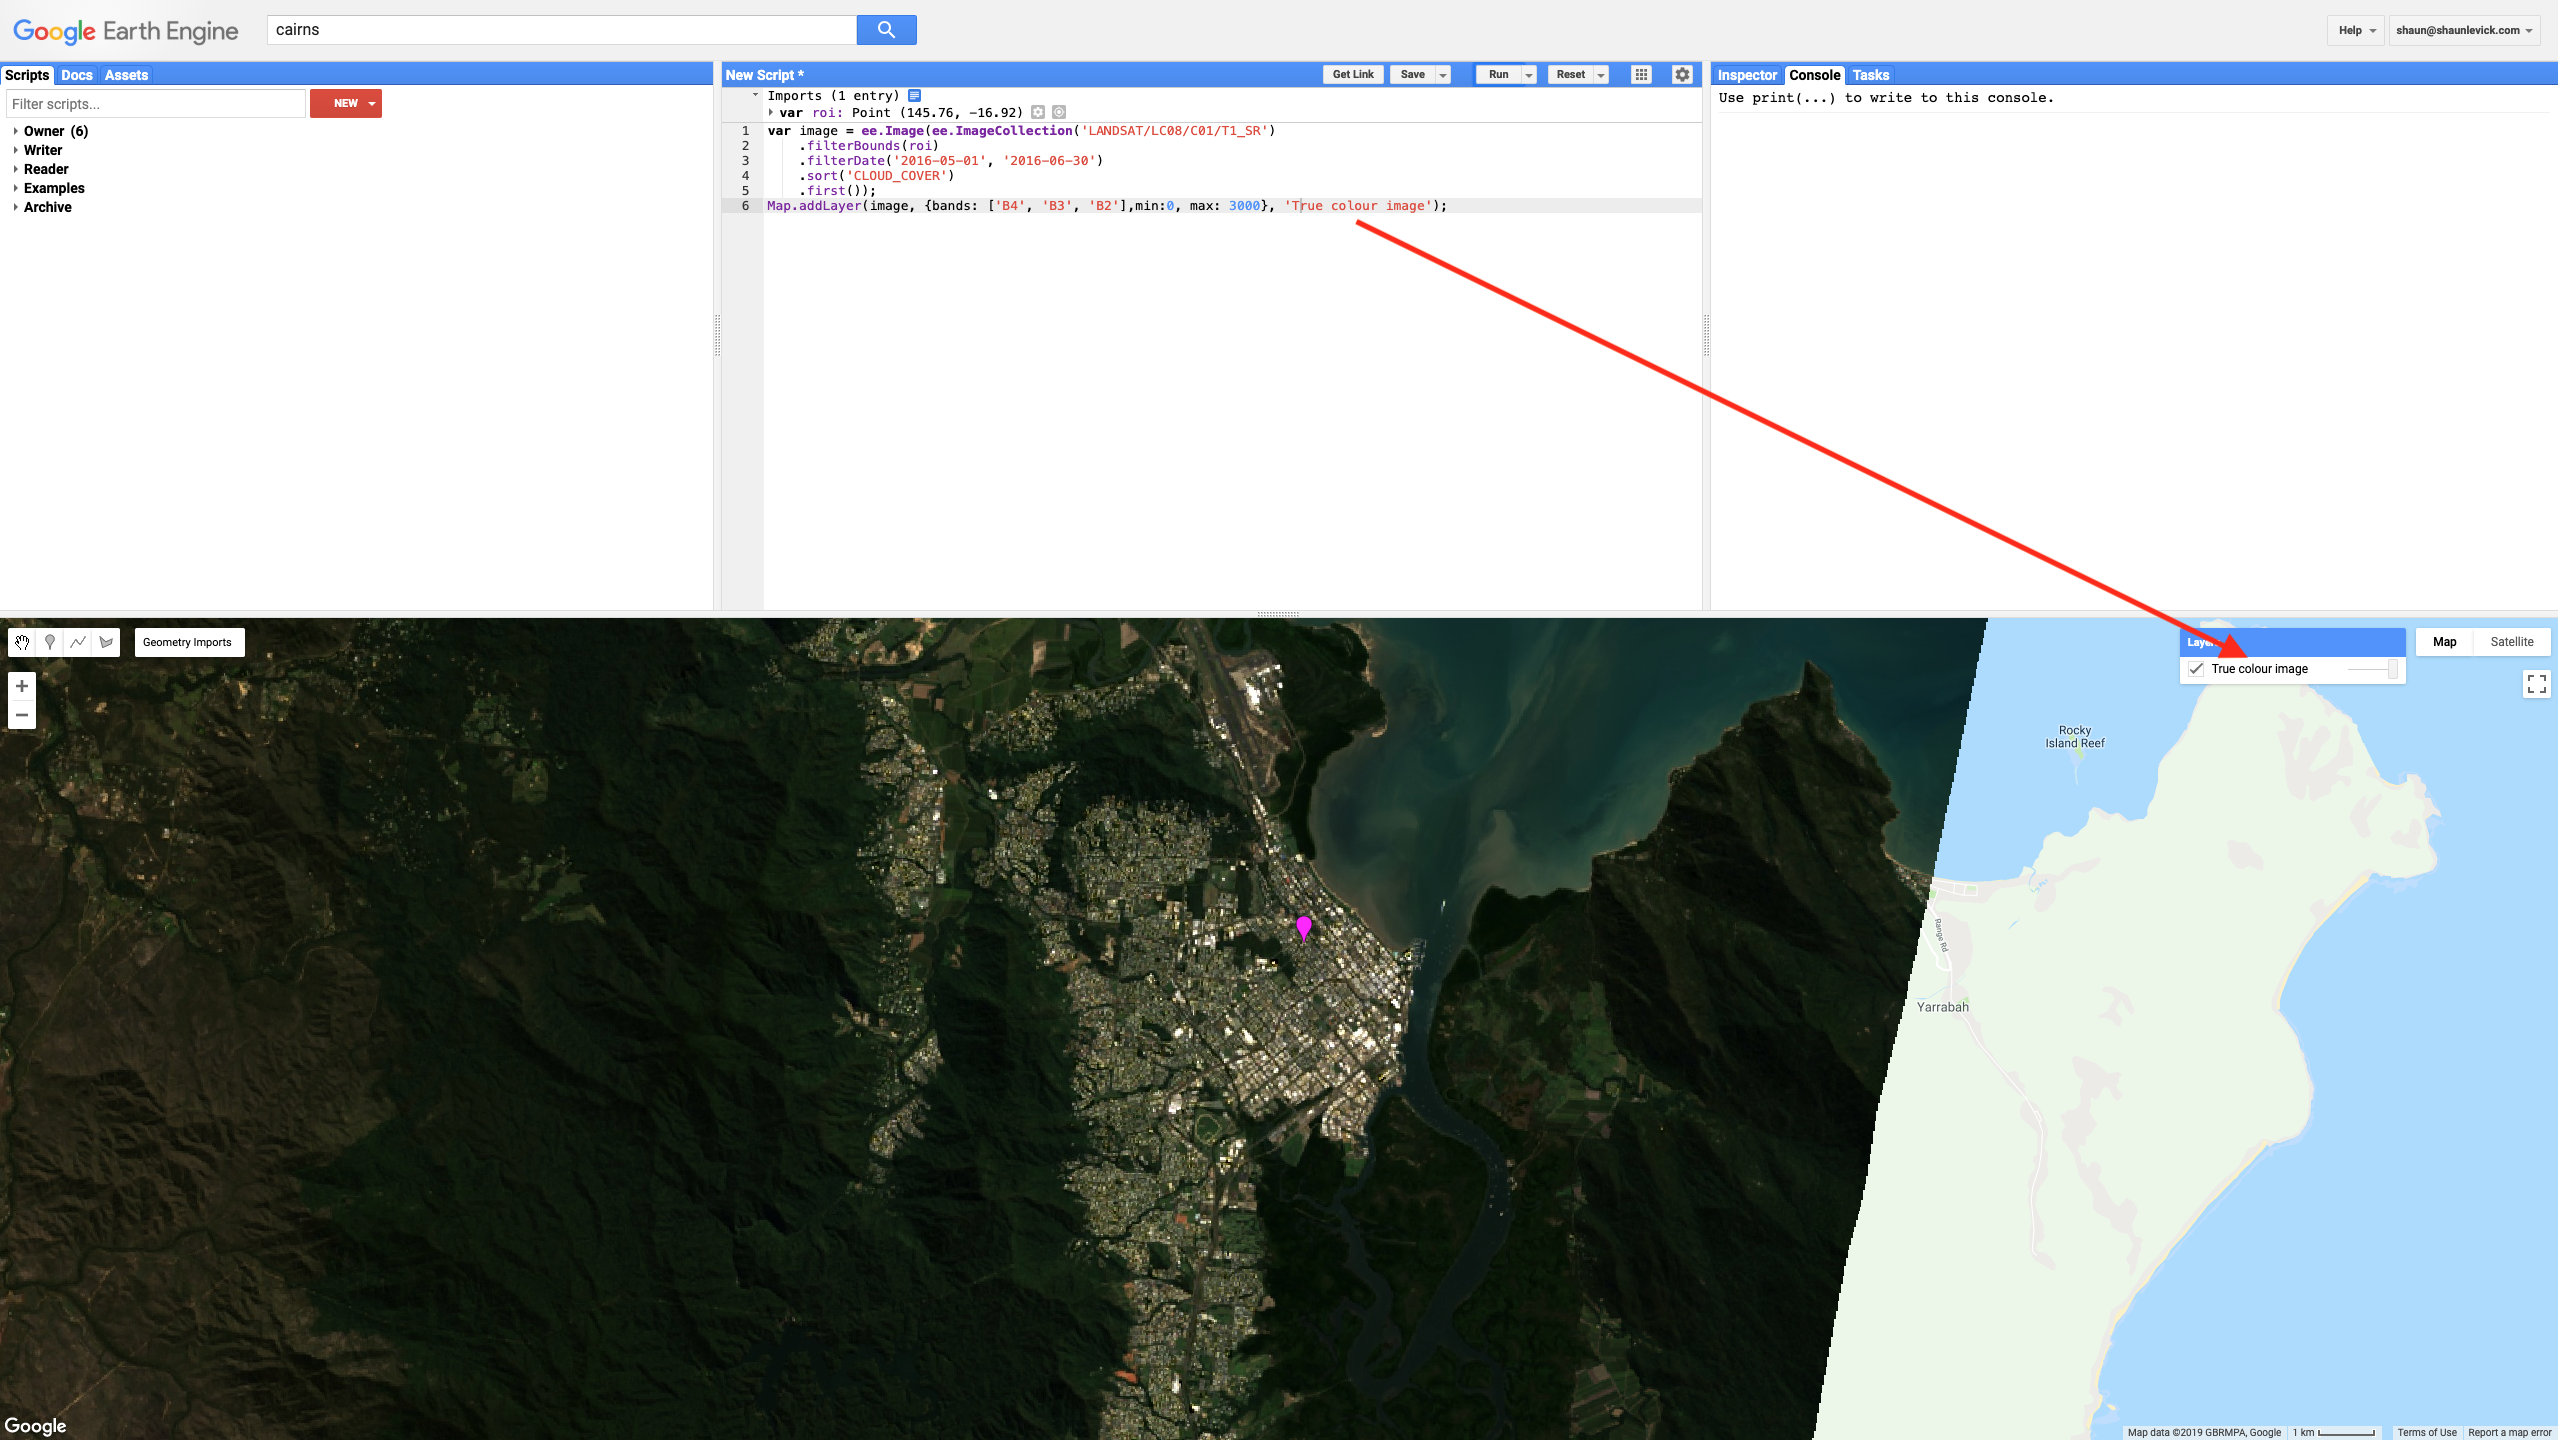 Figure 2. Adding image to map view